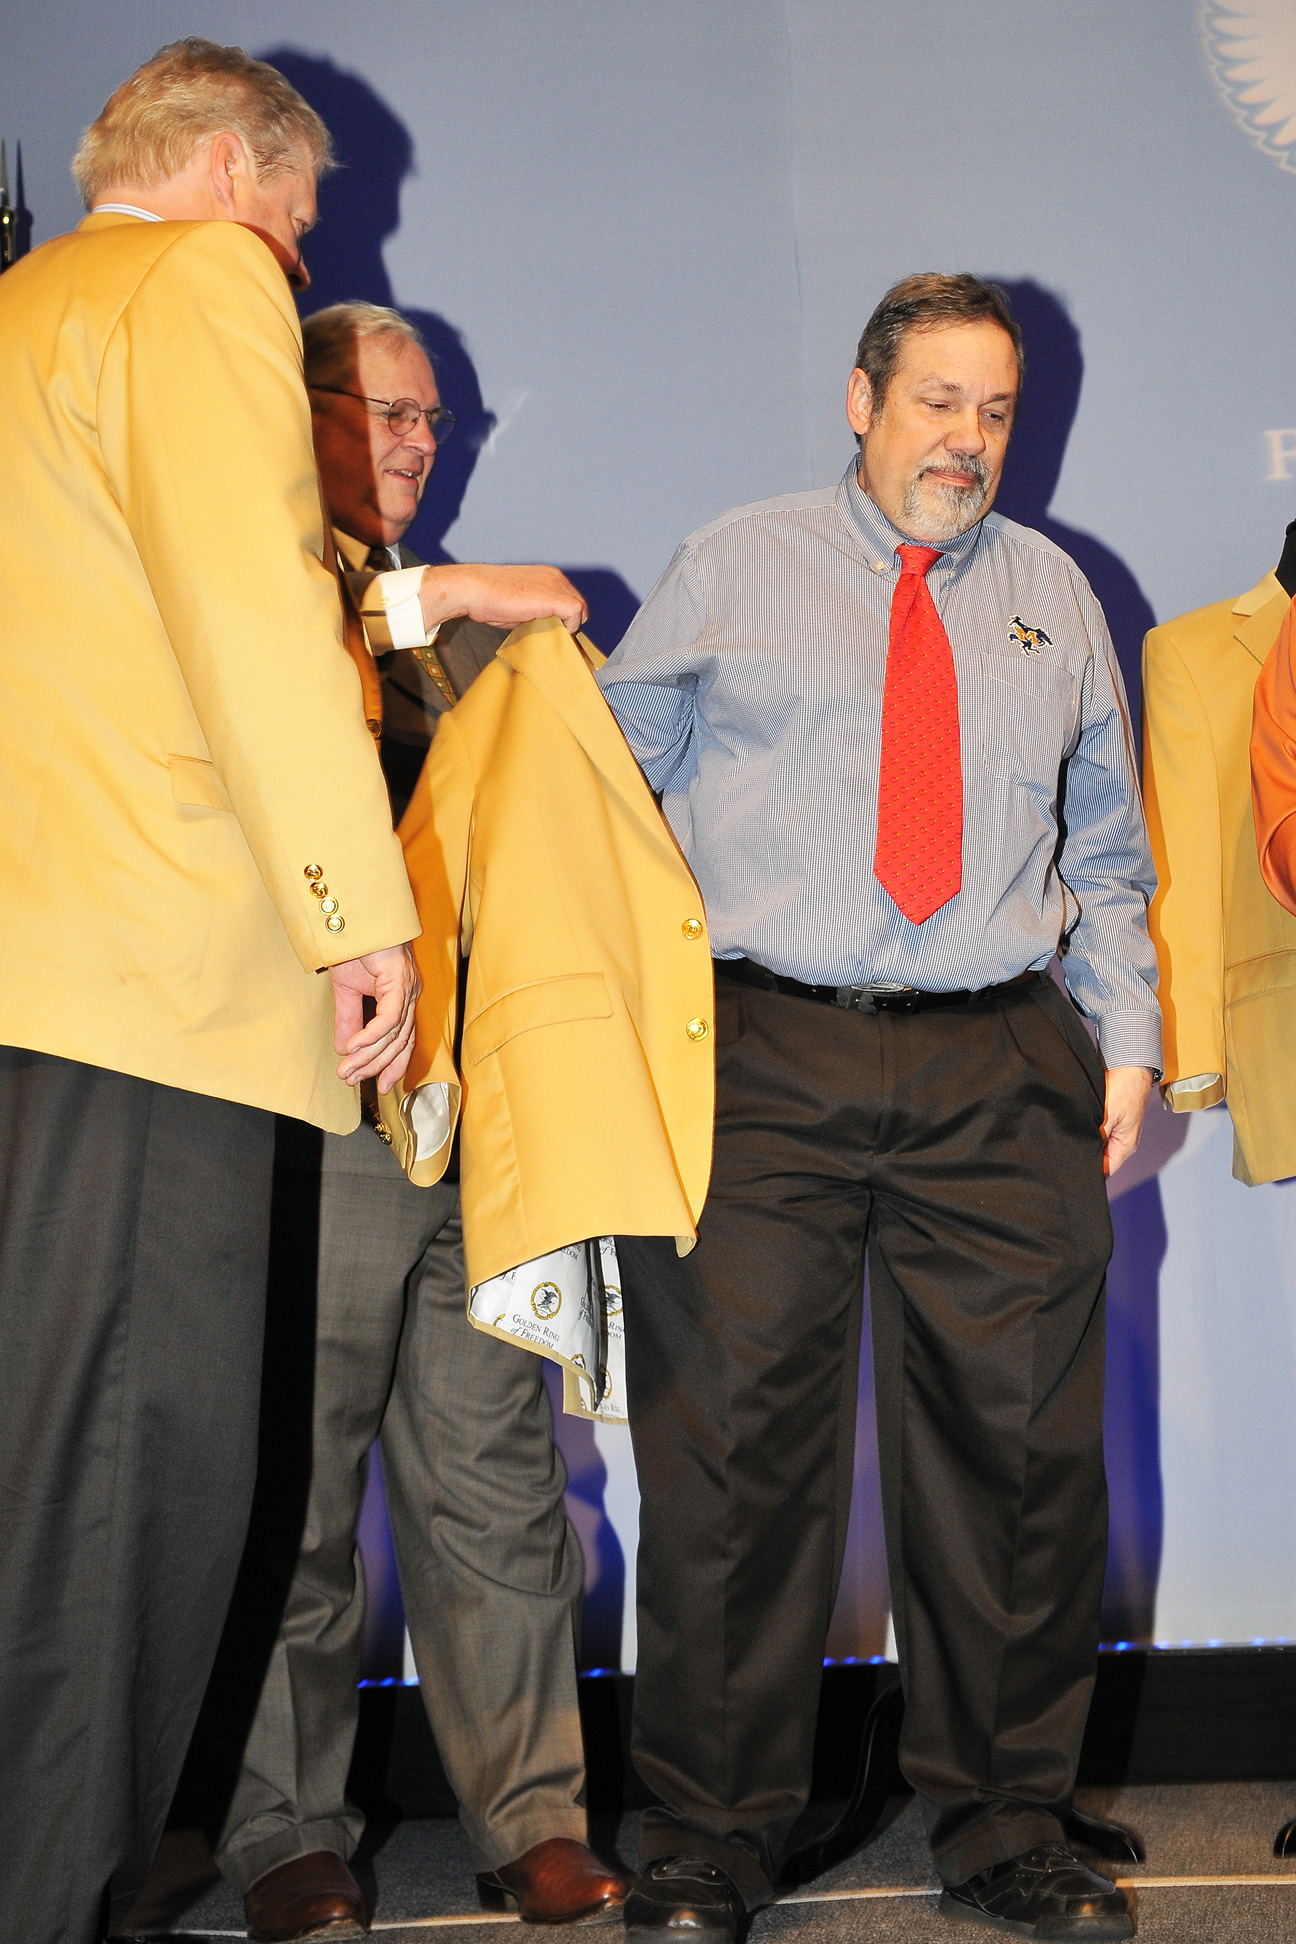 Michael Fuljenz receives his custom-tailored gold jacket at his induction into the NRA Golden Ring of Freedom society in Nashville, Tennessee on April 10, 2015.  (Photo by Jerry Jordan.)